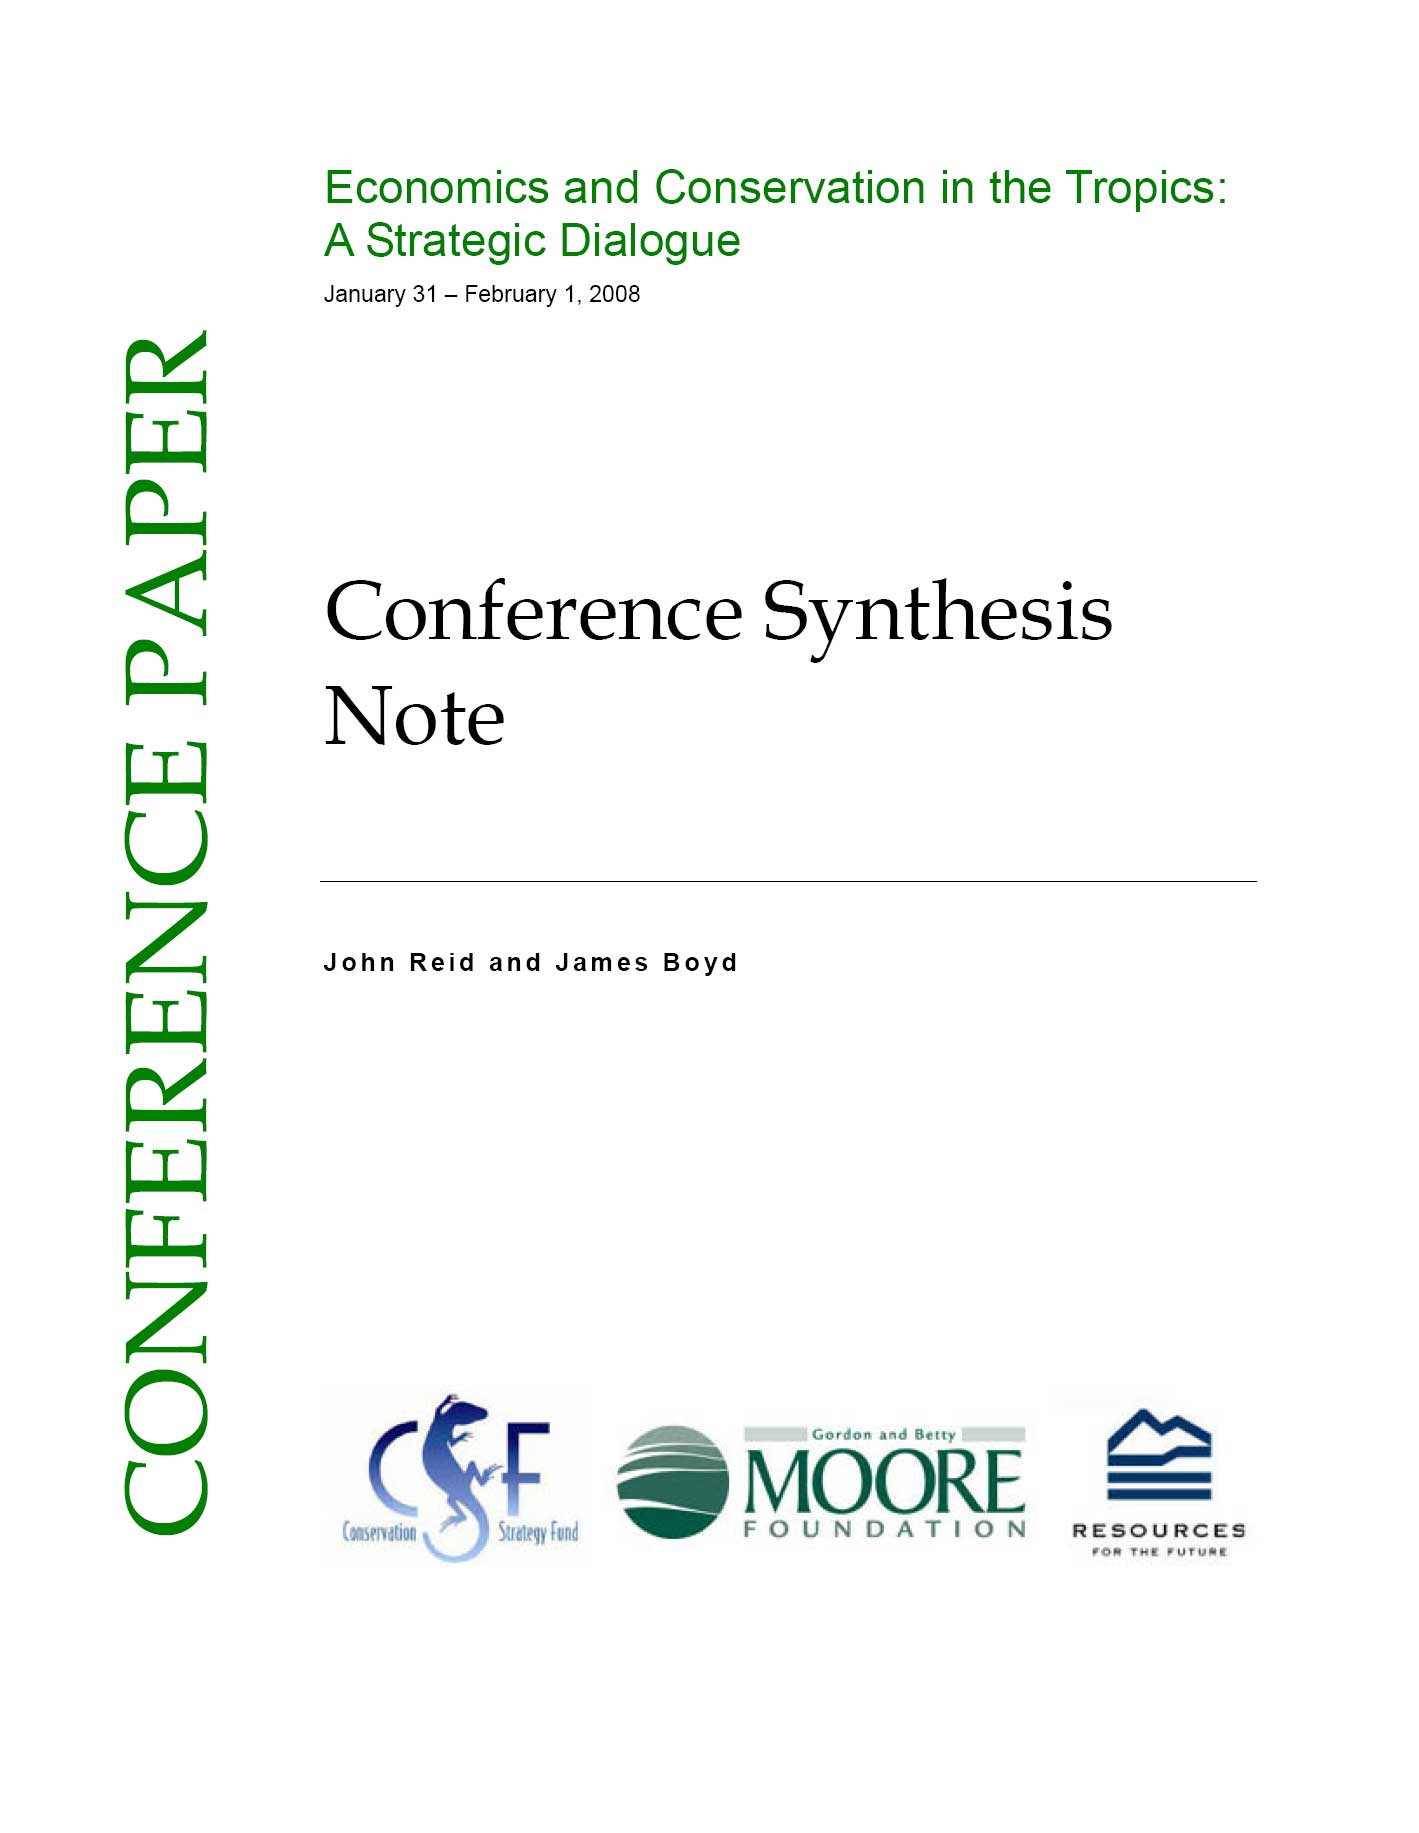 Conference Synthesis Note image